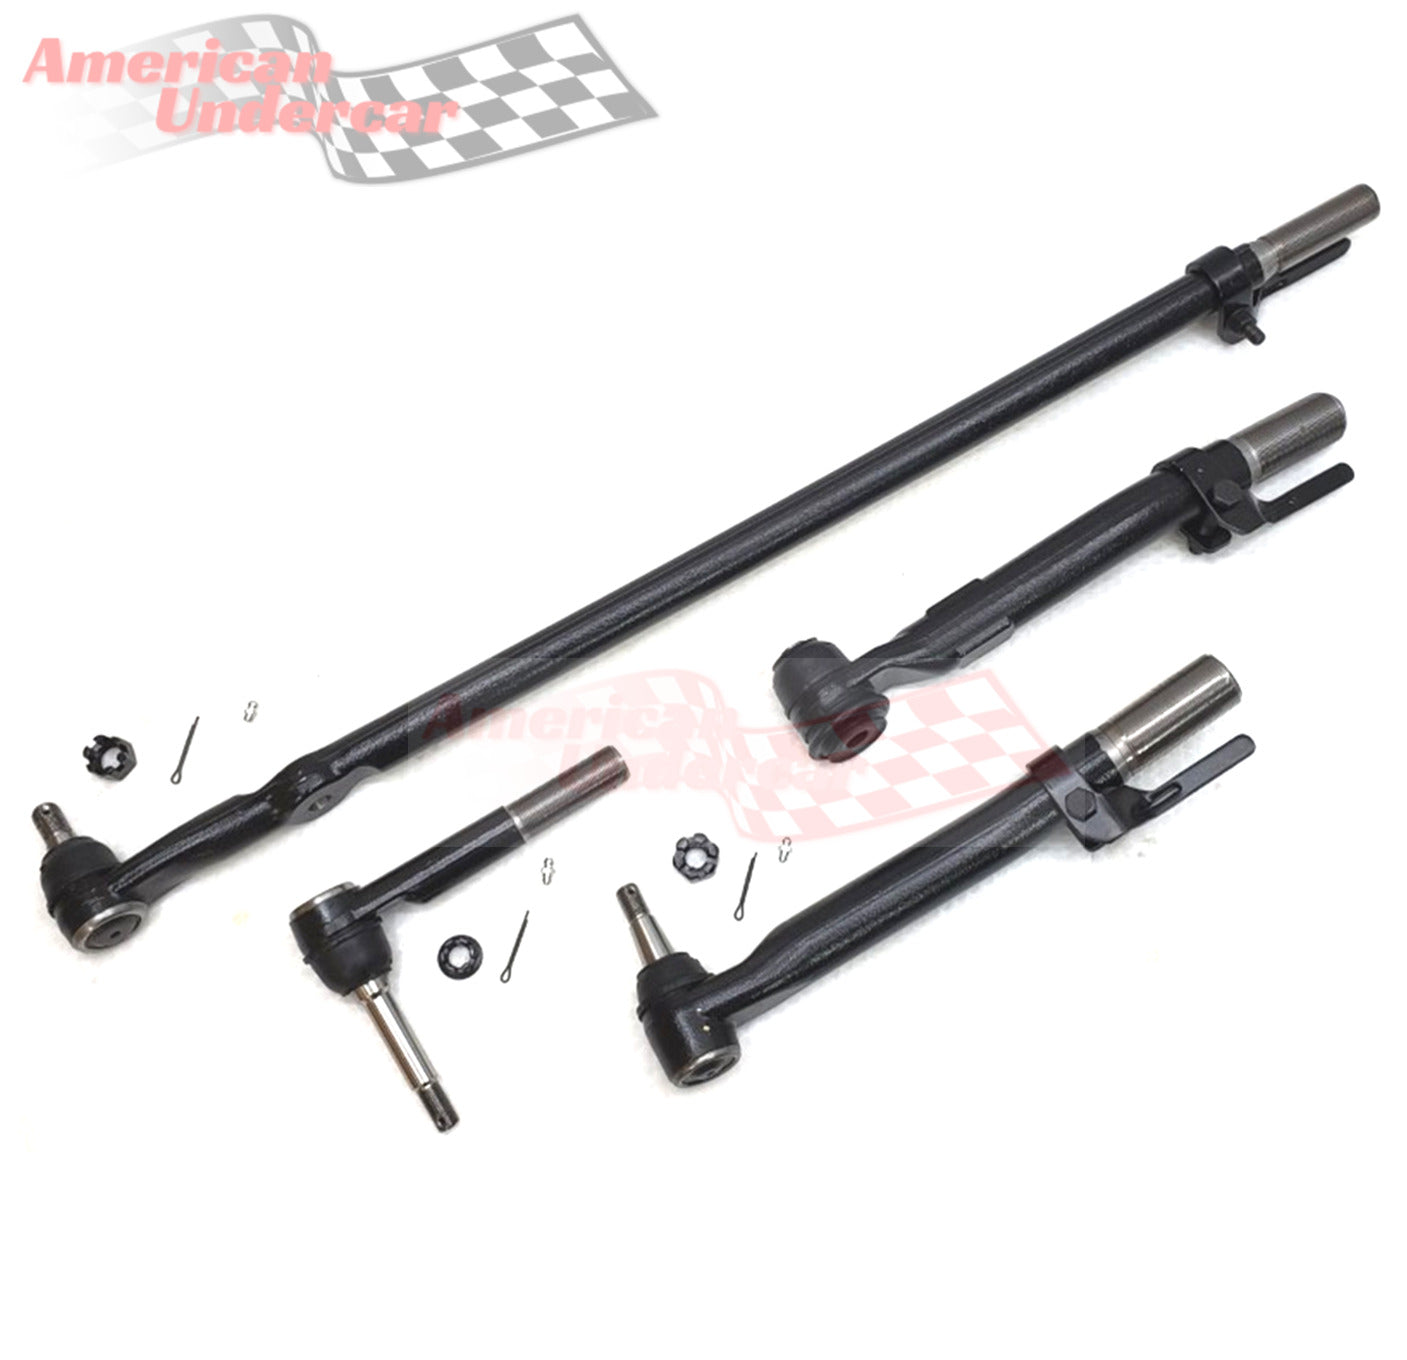 XRF Ford F550 Super Duty Steering and Suspension Kit 2005 - 2010 4x4